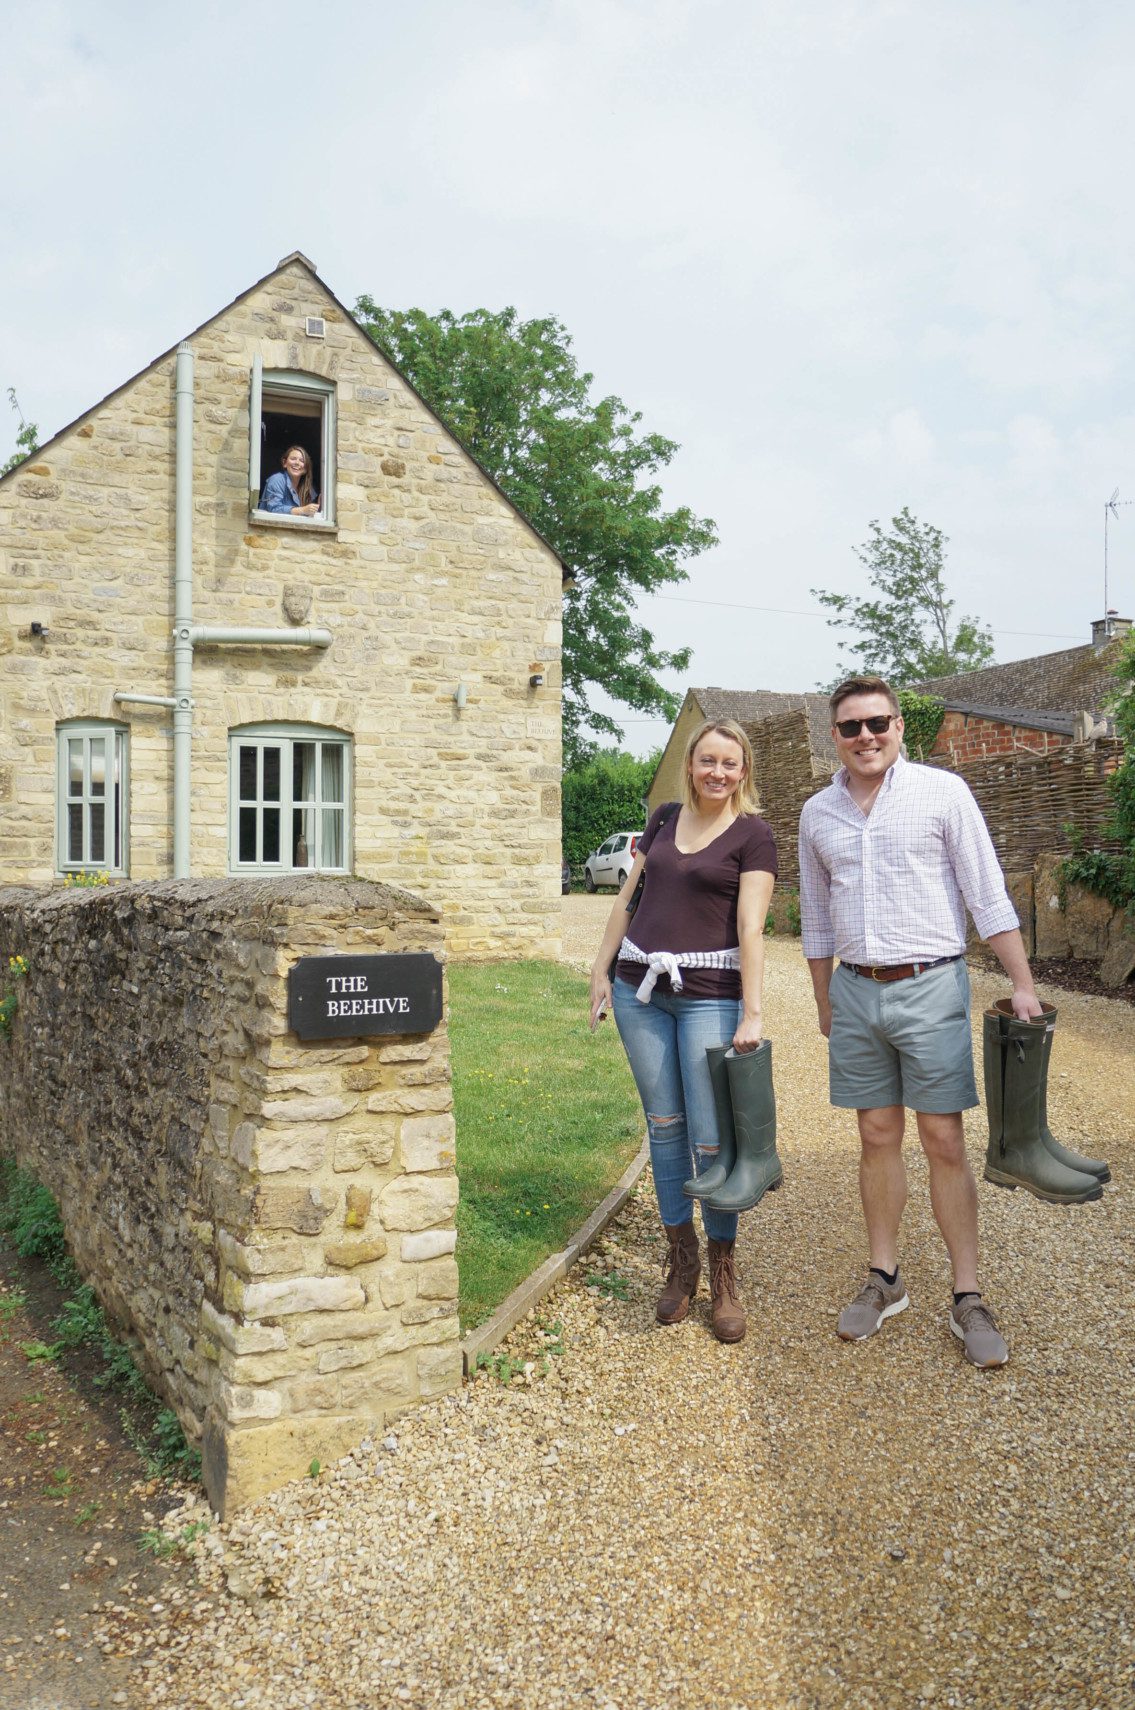 The Wild Rabbit is a charming country house hotel in The Cotswolds. A Daylesford property, it is less than a mile away from Dalyesford Farm and Bamford Spa.